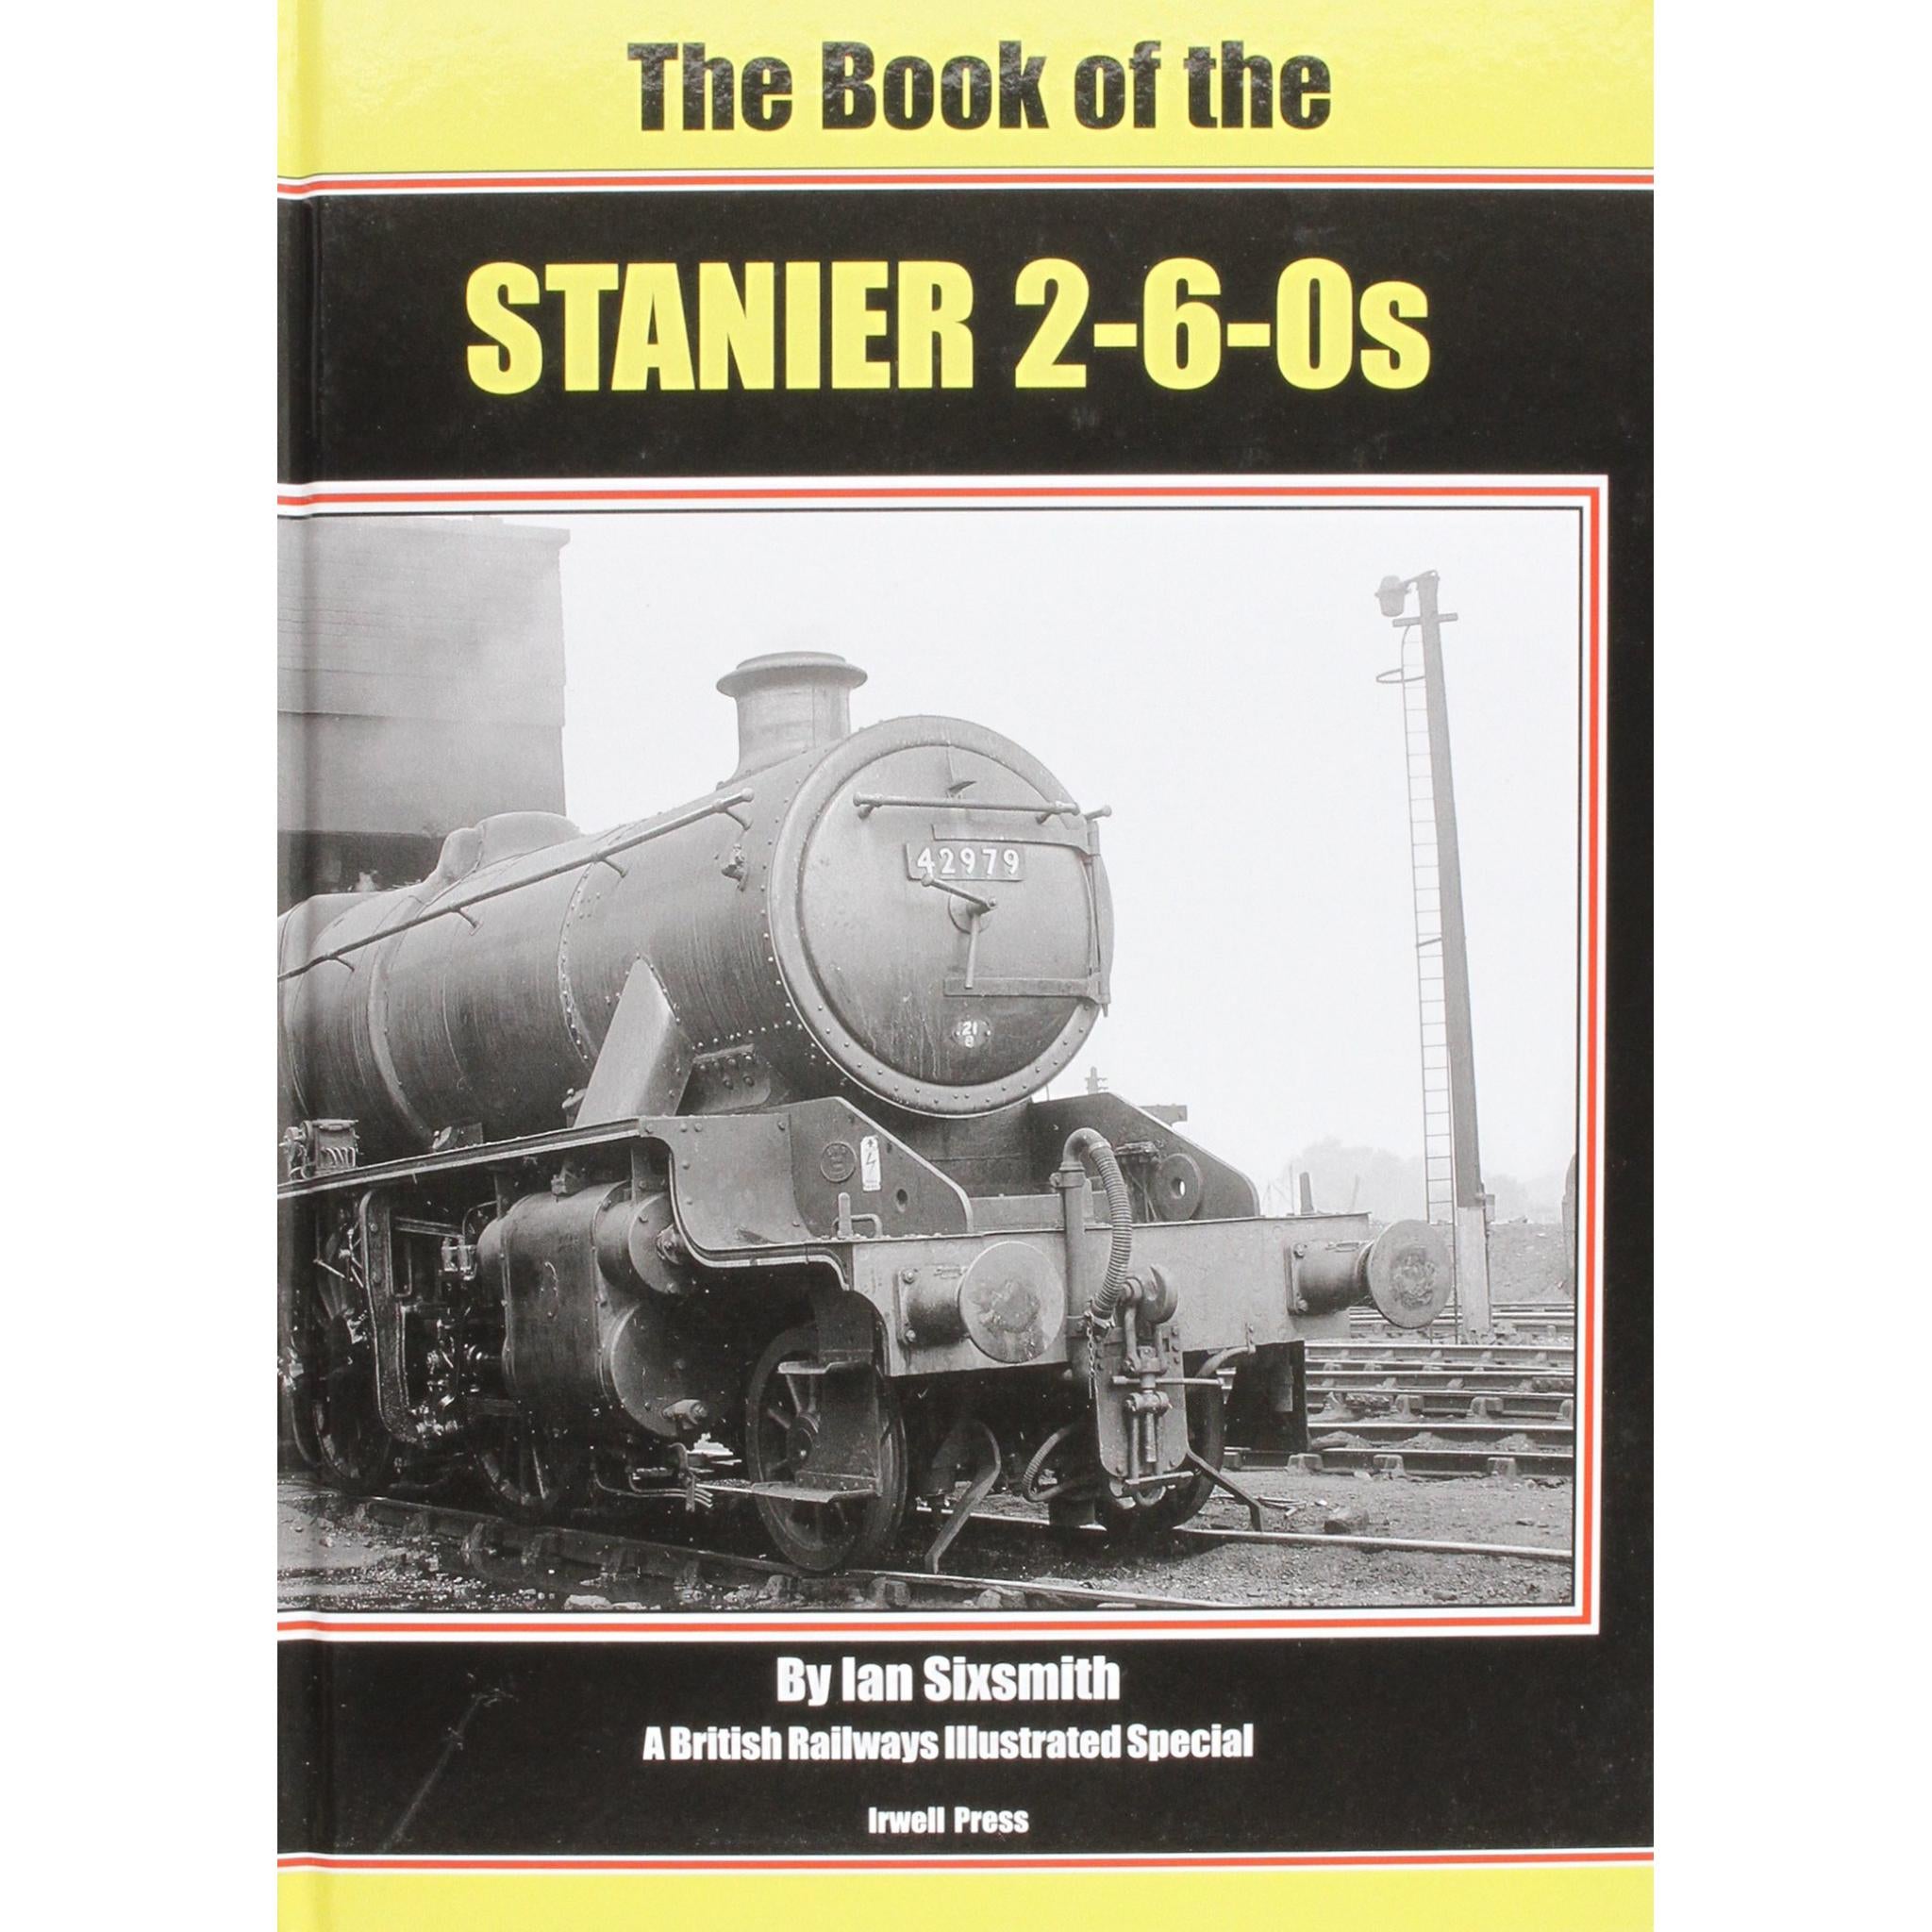 The Book of the STANIER 2-6-0s LAST FEW COPIES